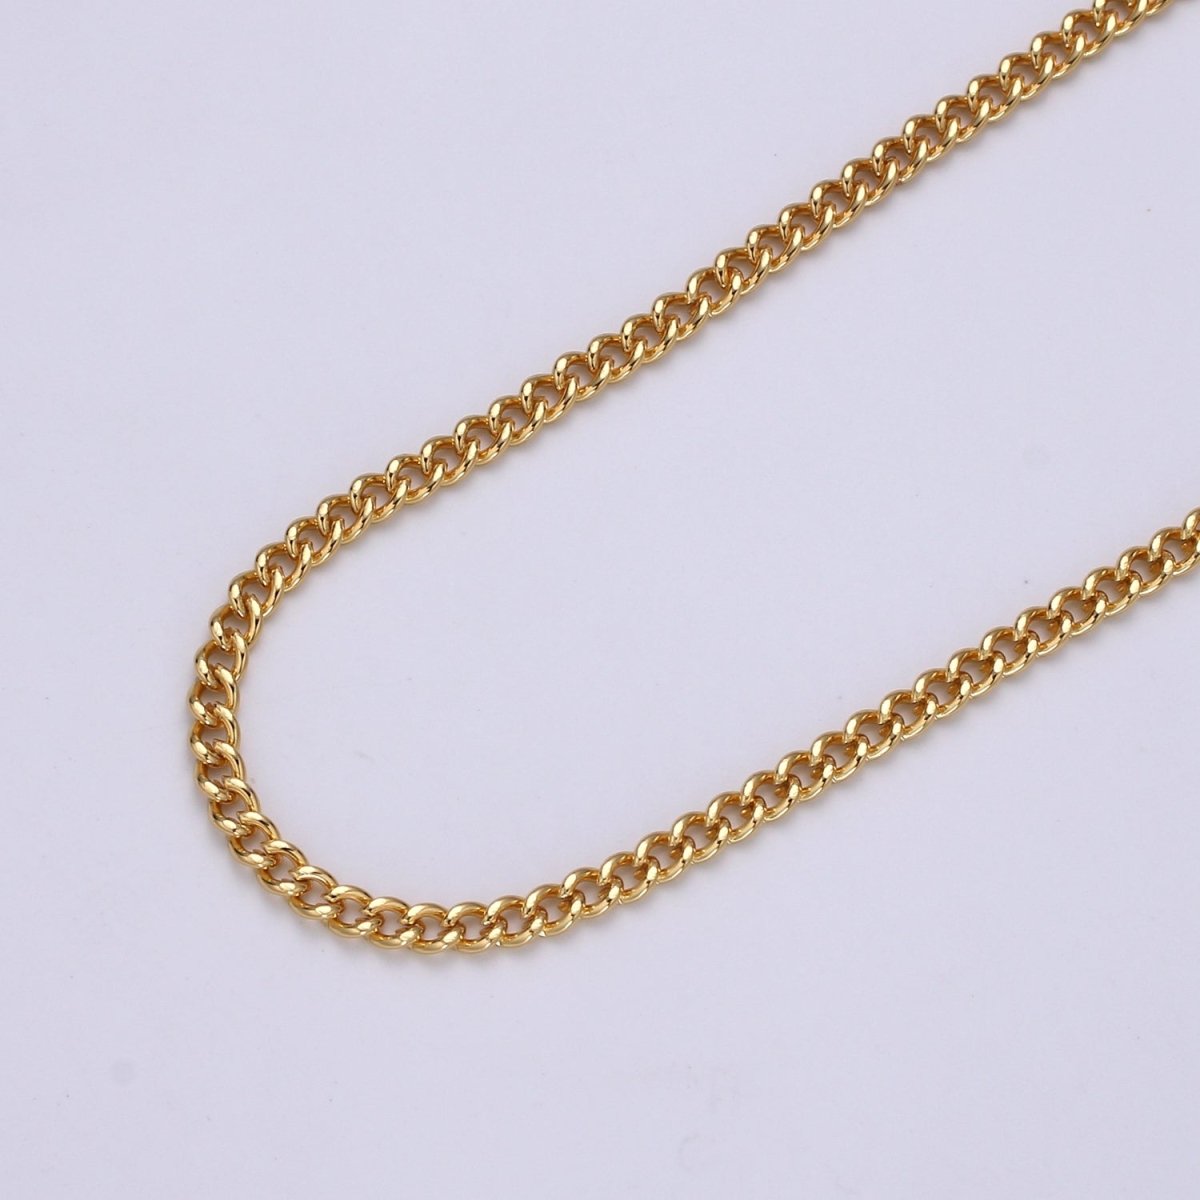 Gold CURB Chain by Yard, Wholesale Bulk Roll Chain For Jewelry Making, Width 2.9mm, 24K Gold Filled, White Gold Filled Matte Unfinished Chain | ROLL-497, ROLL-498 Clearance Pricing - DLUXCA